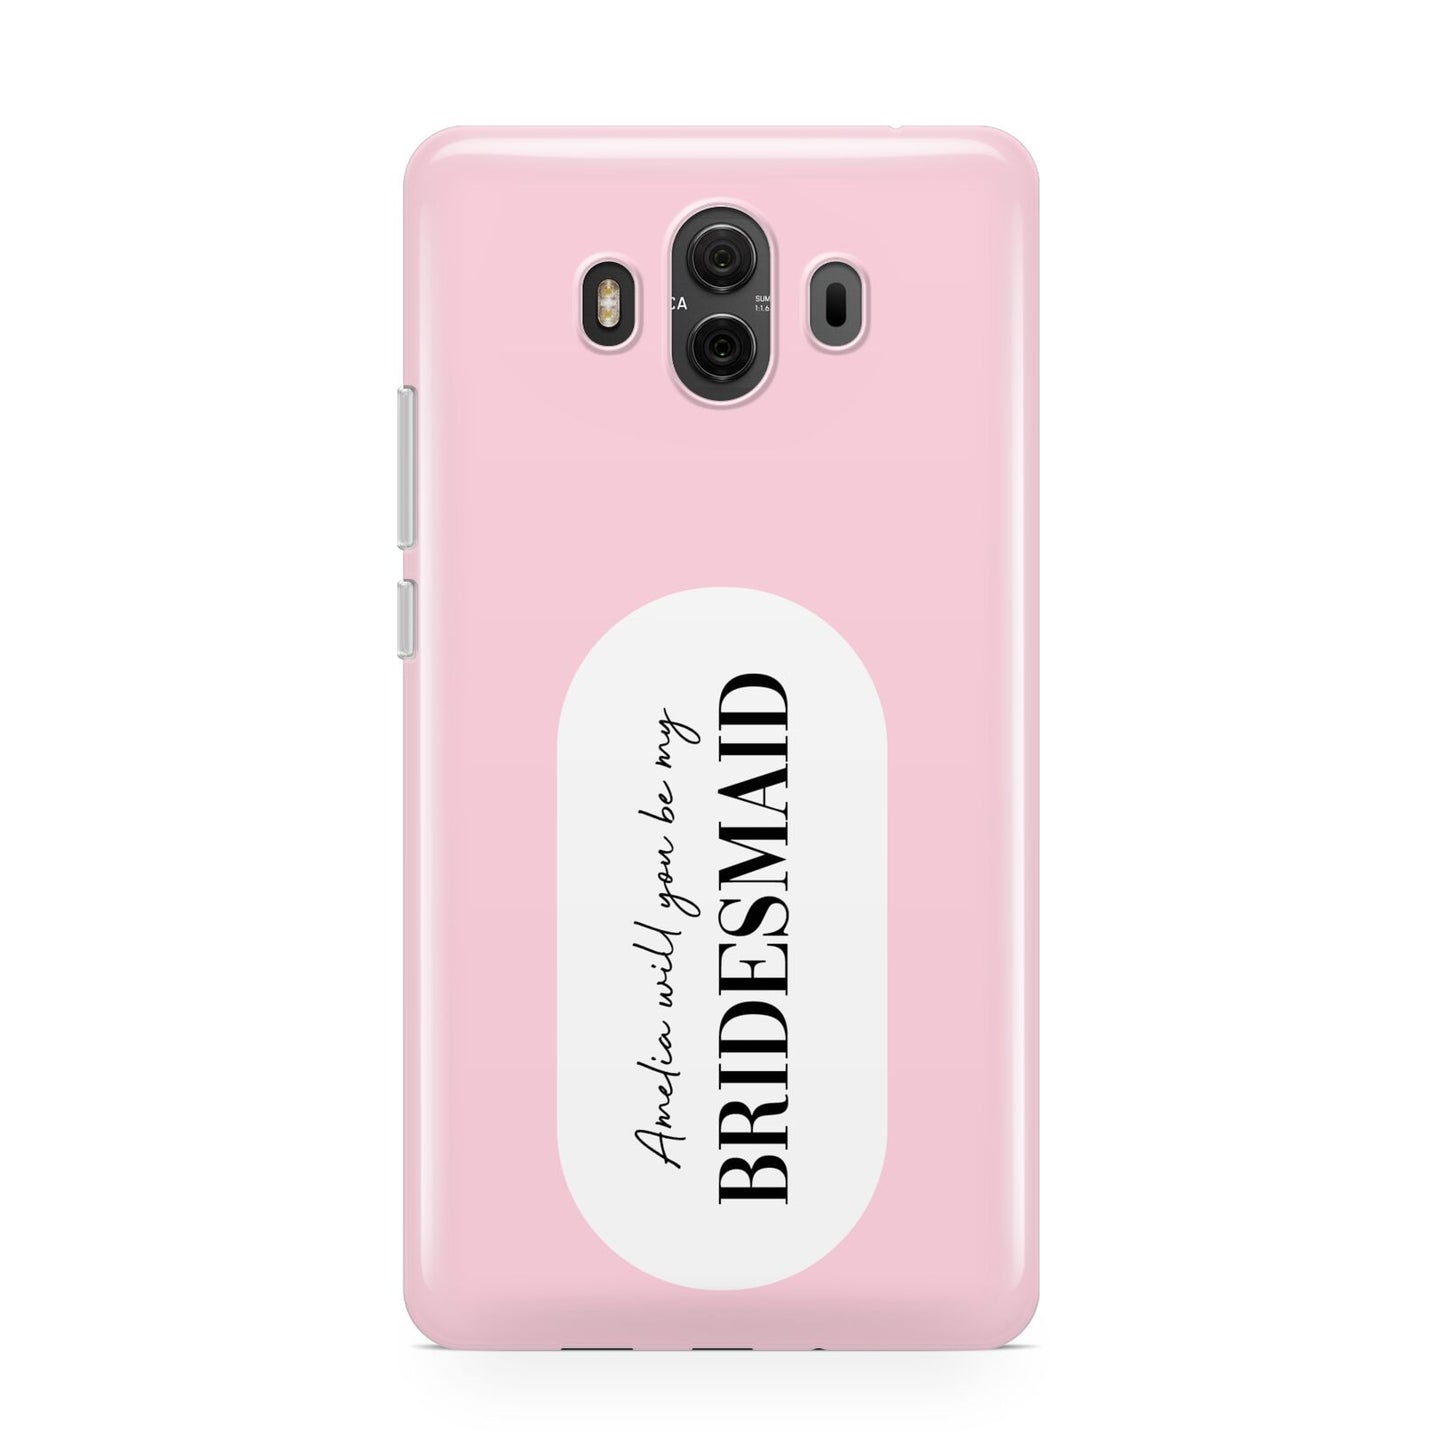 Will You Be My Bridesmaid Huawei Mate 10 Protective Phone Case